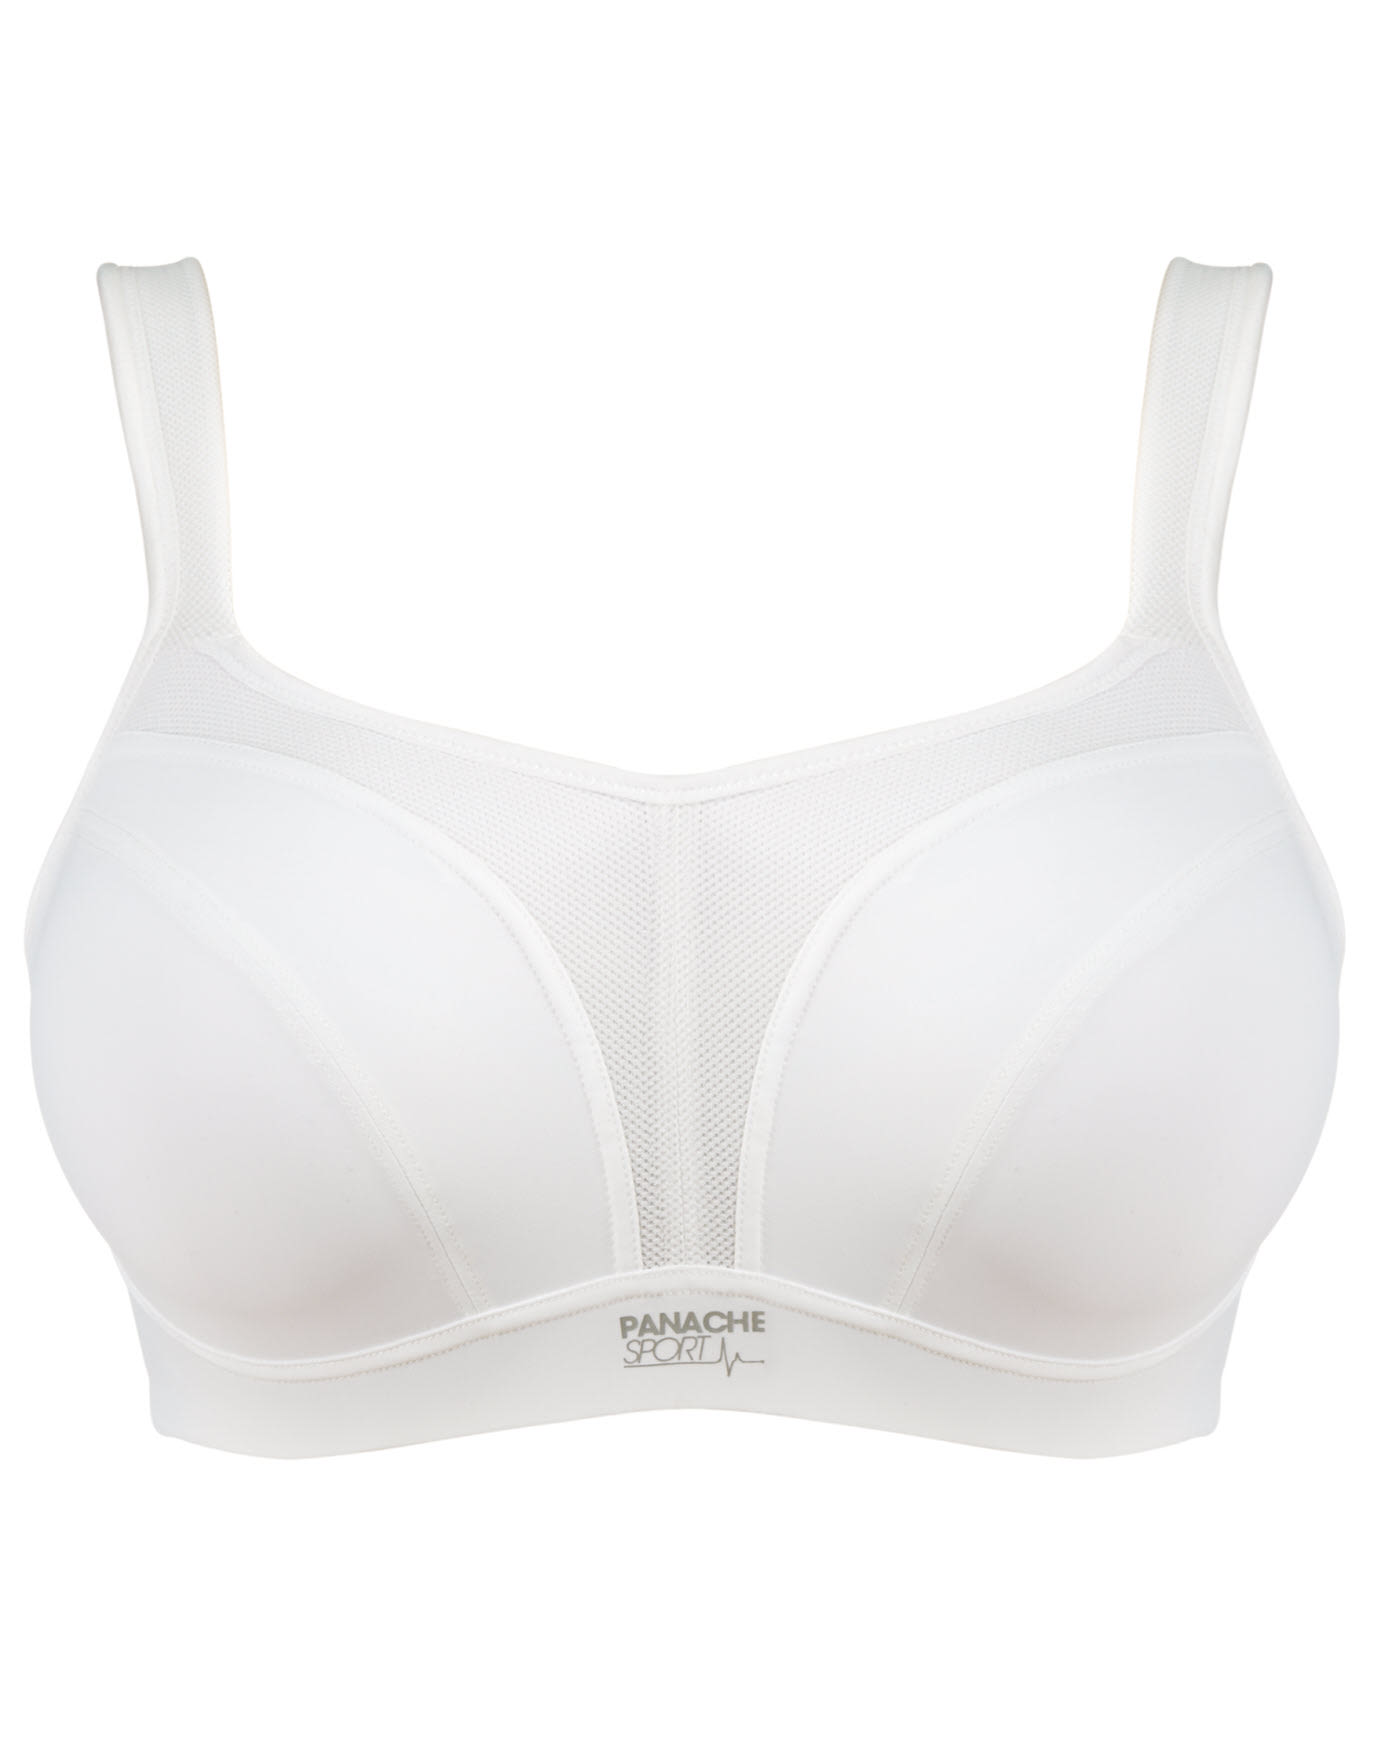 32F 3x Used Bras BRAVISSIMO PANACHE M&S in B70 7LB WEST BROMWICH for £14.99  for sale